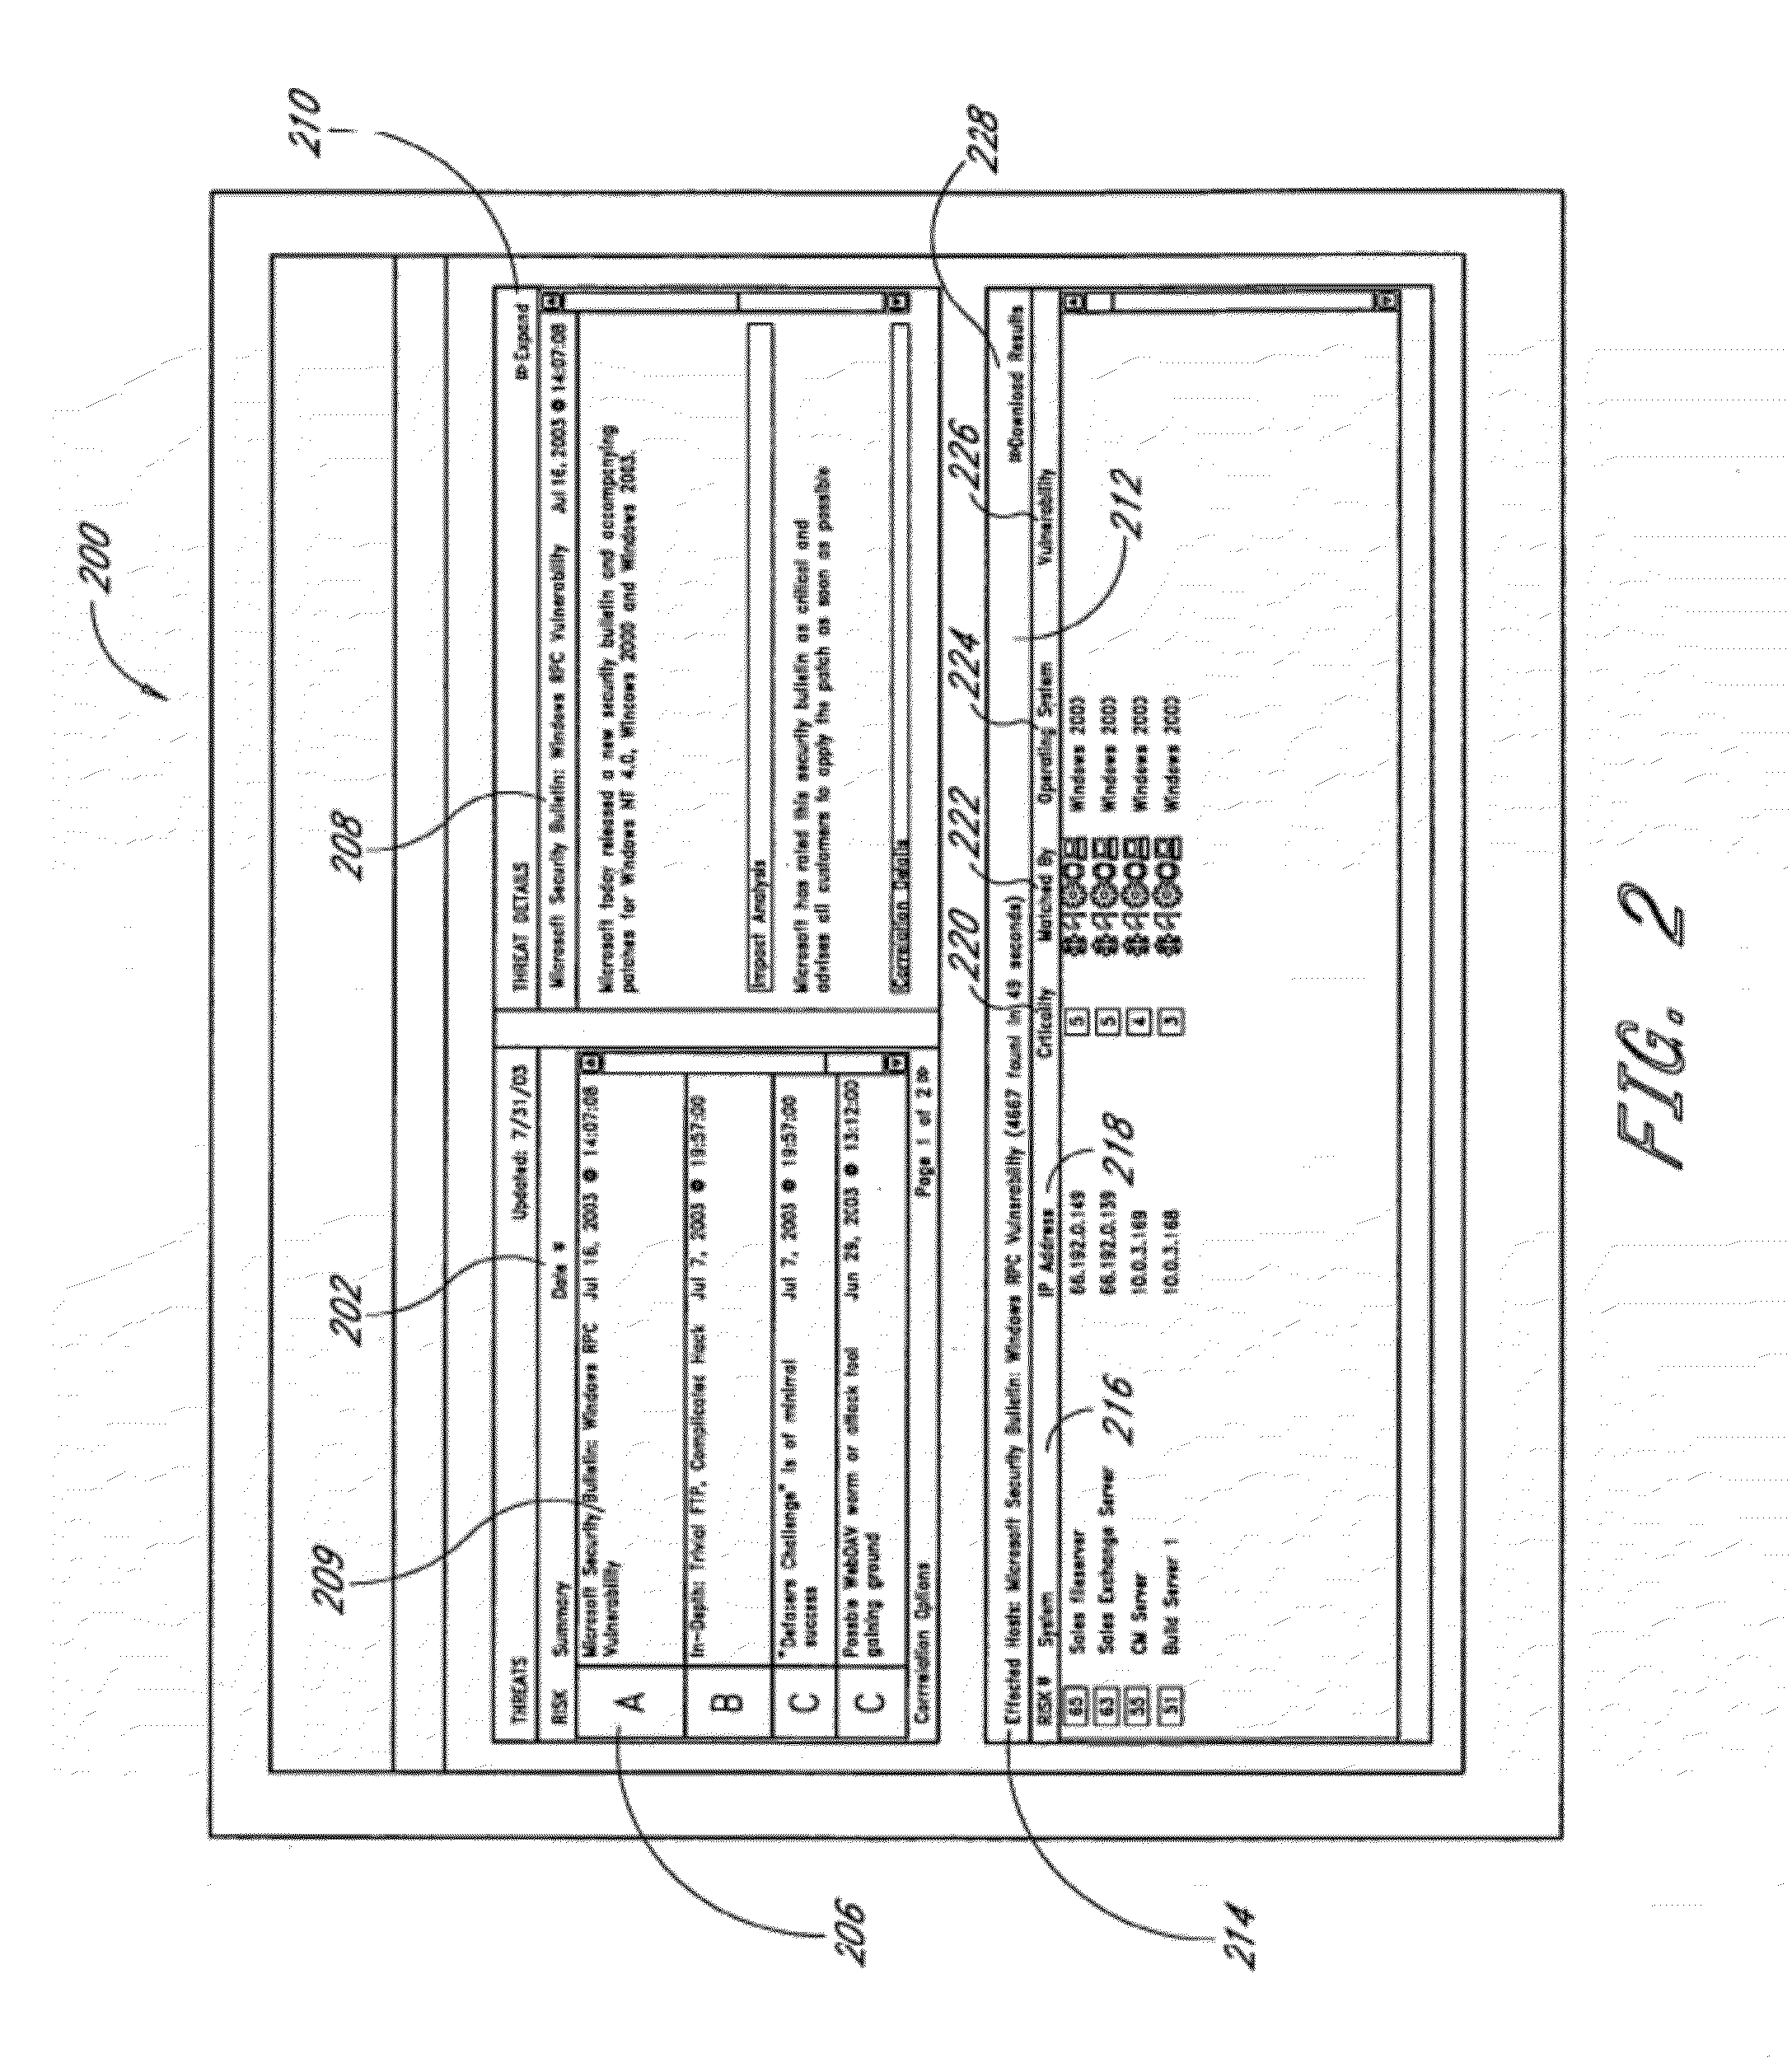 System and method of managing network security risks